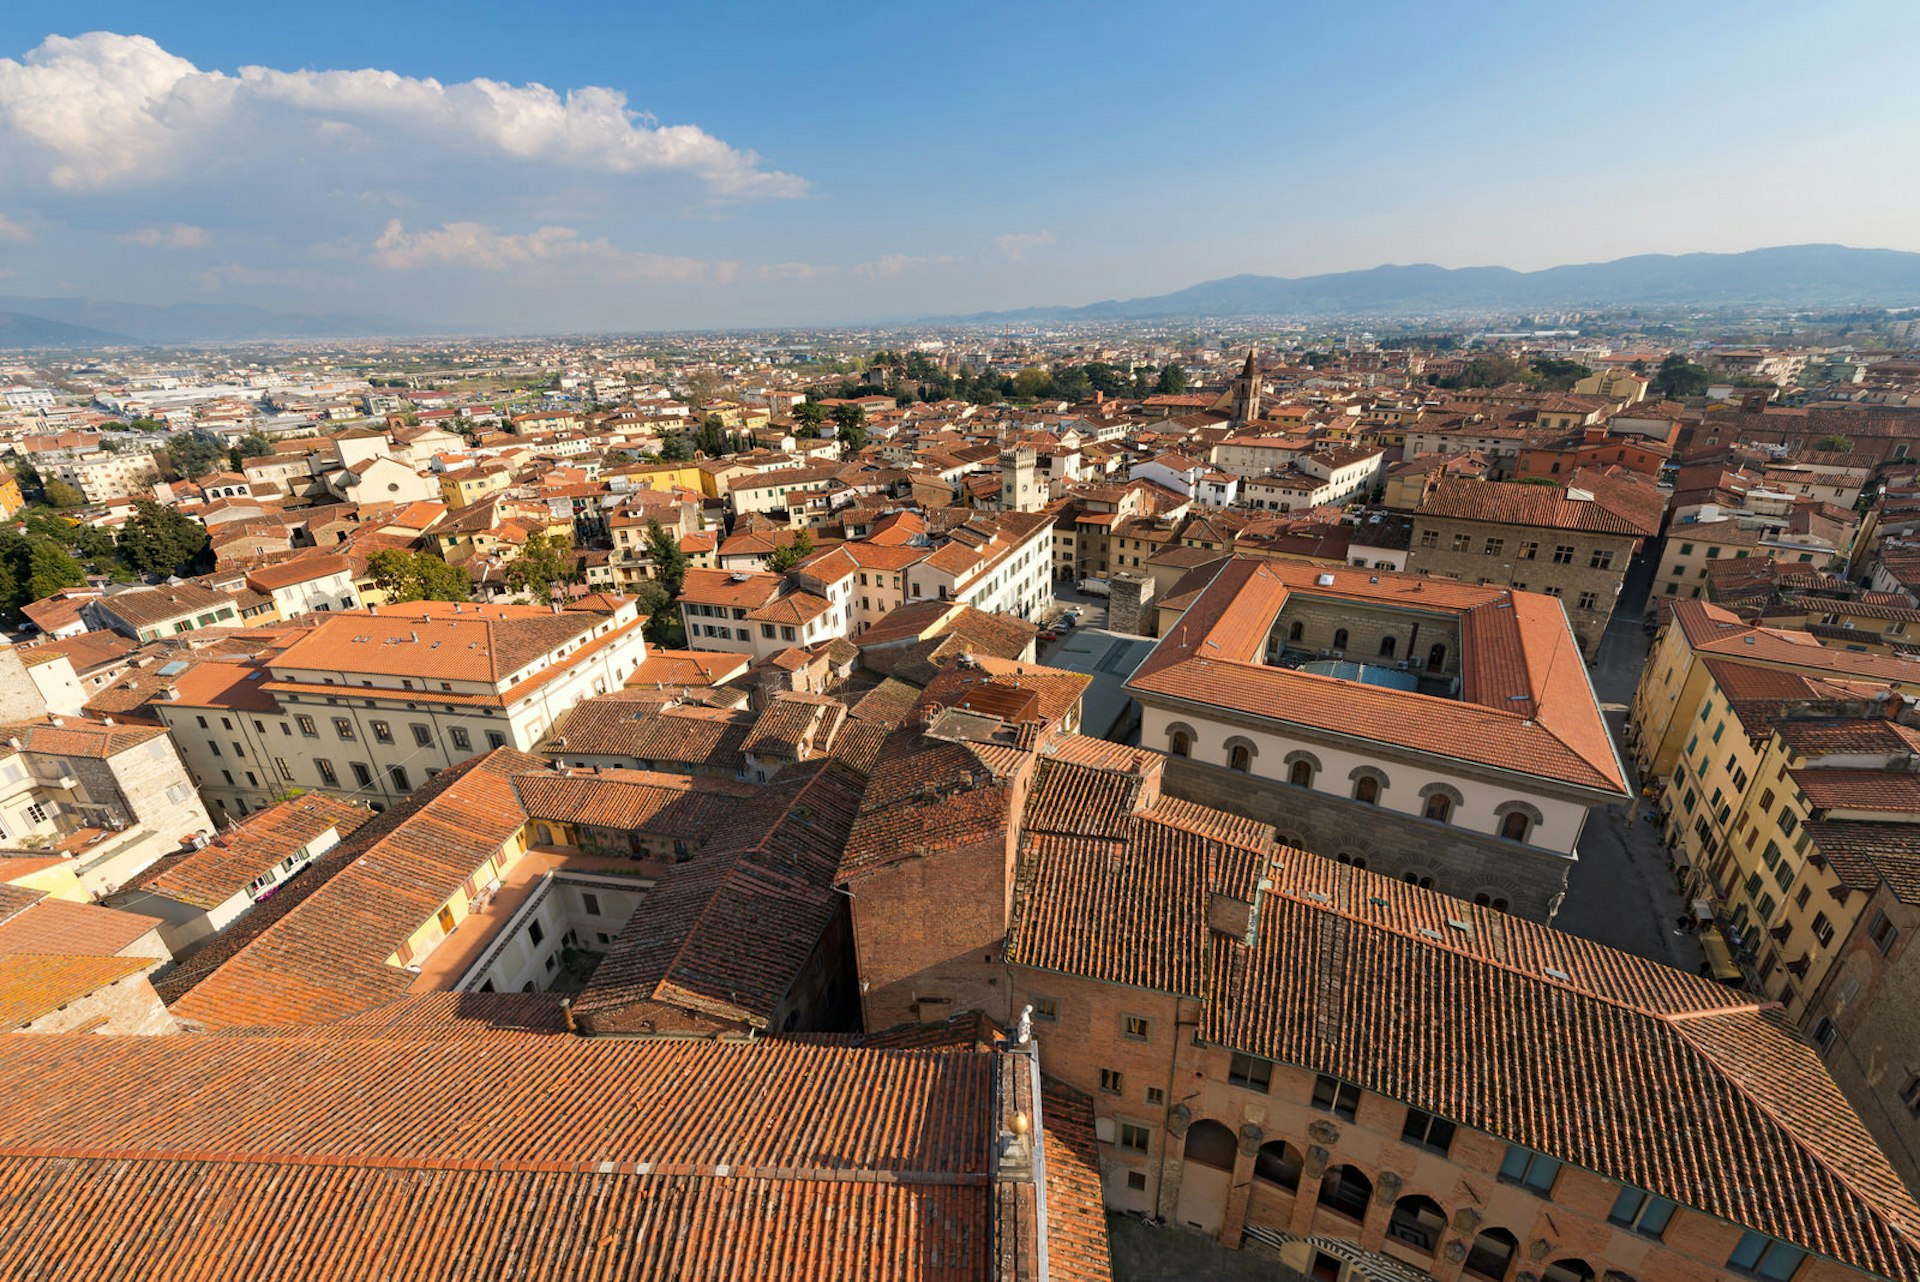 View over Pistoia to the mountains beyond from the cathedral's bell tower